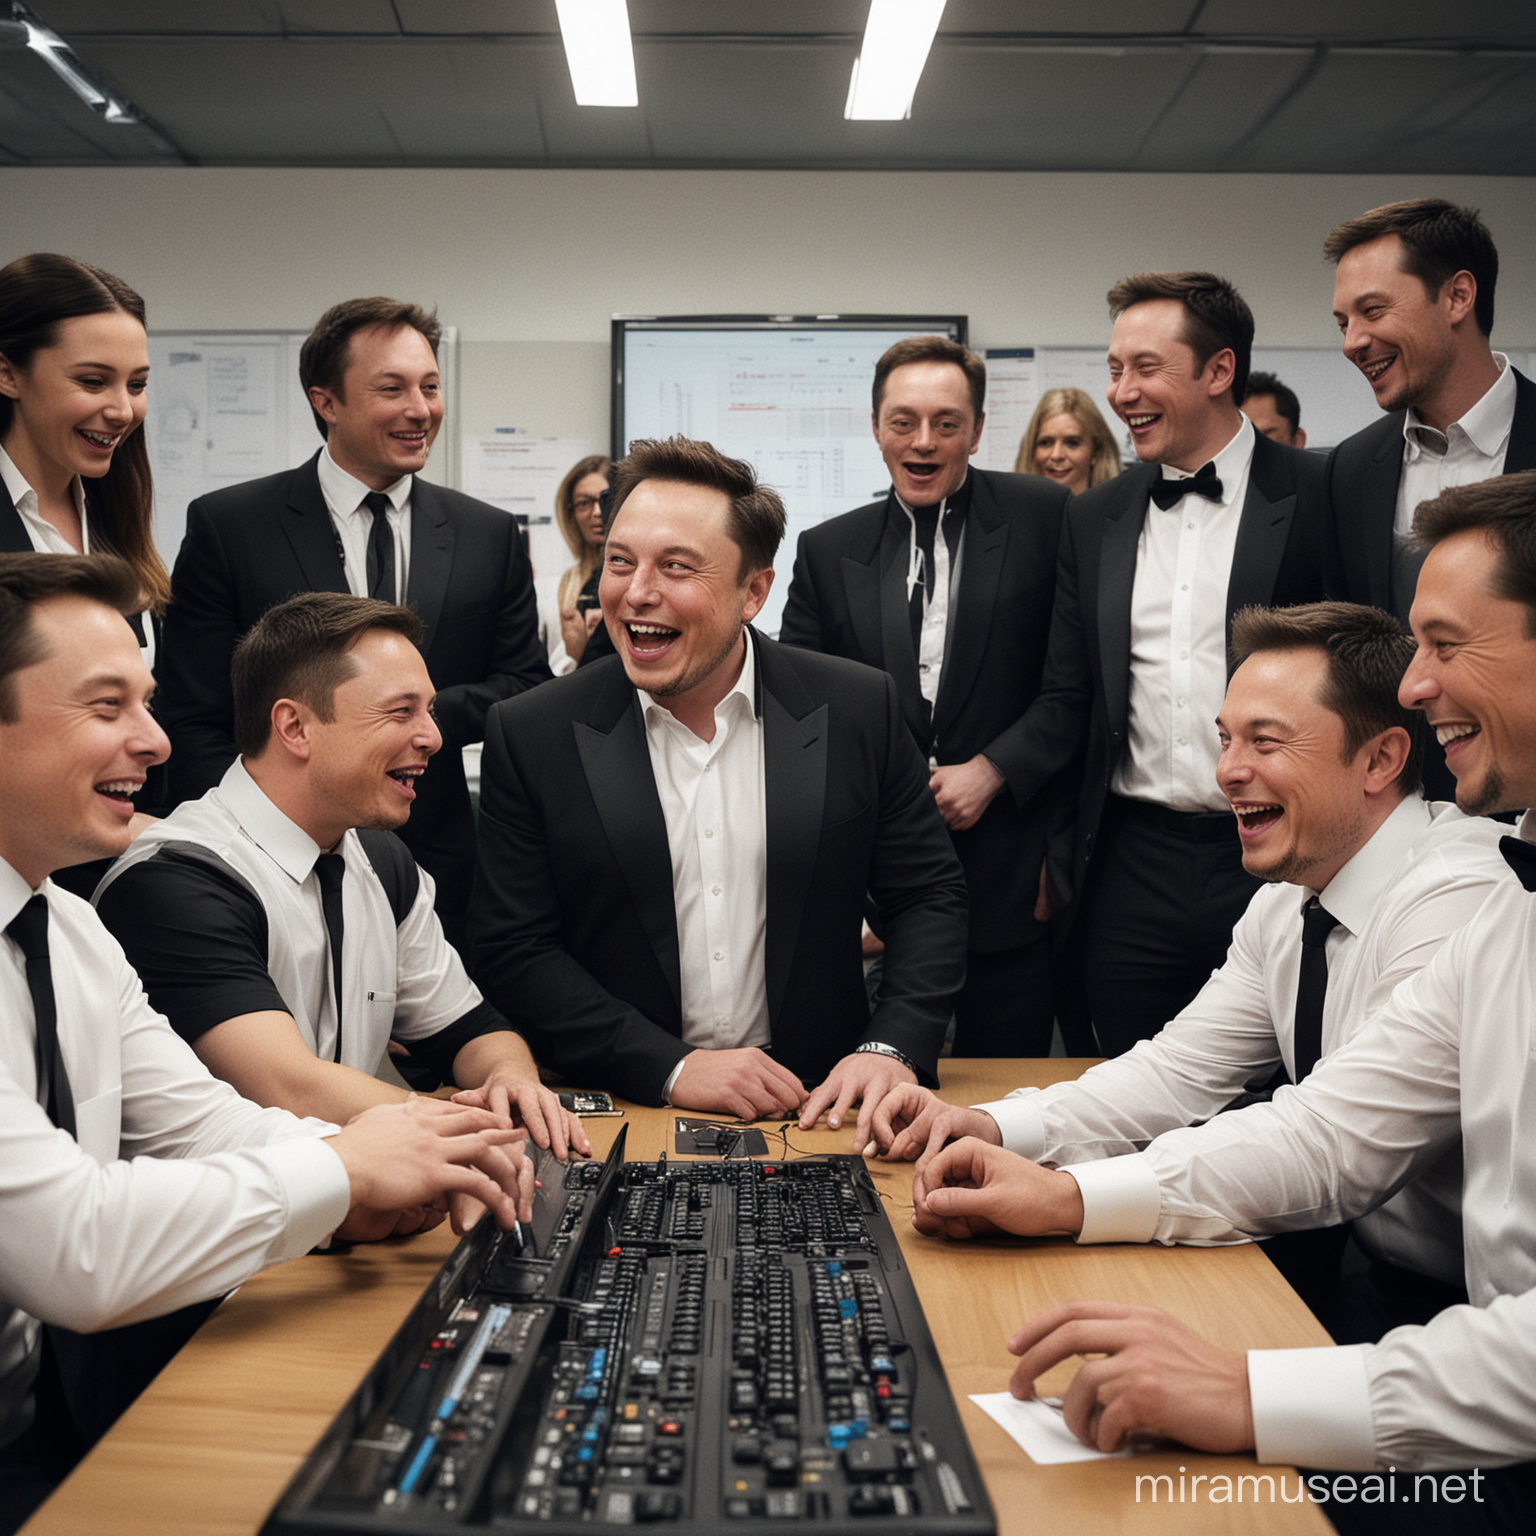 Elon Musk Leading Innovation with Confidence Team Collaboration and Problem Solving